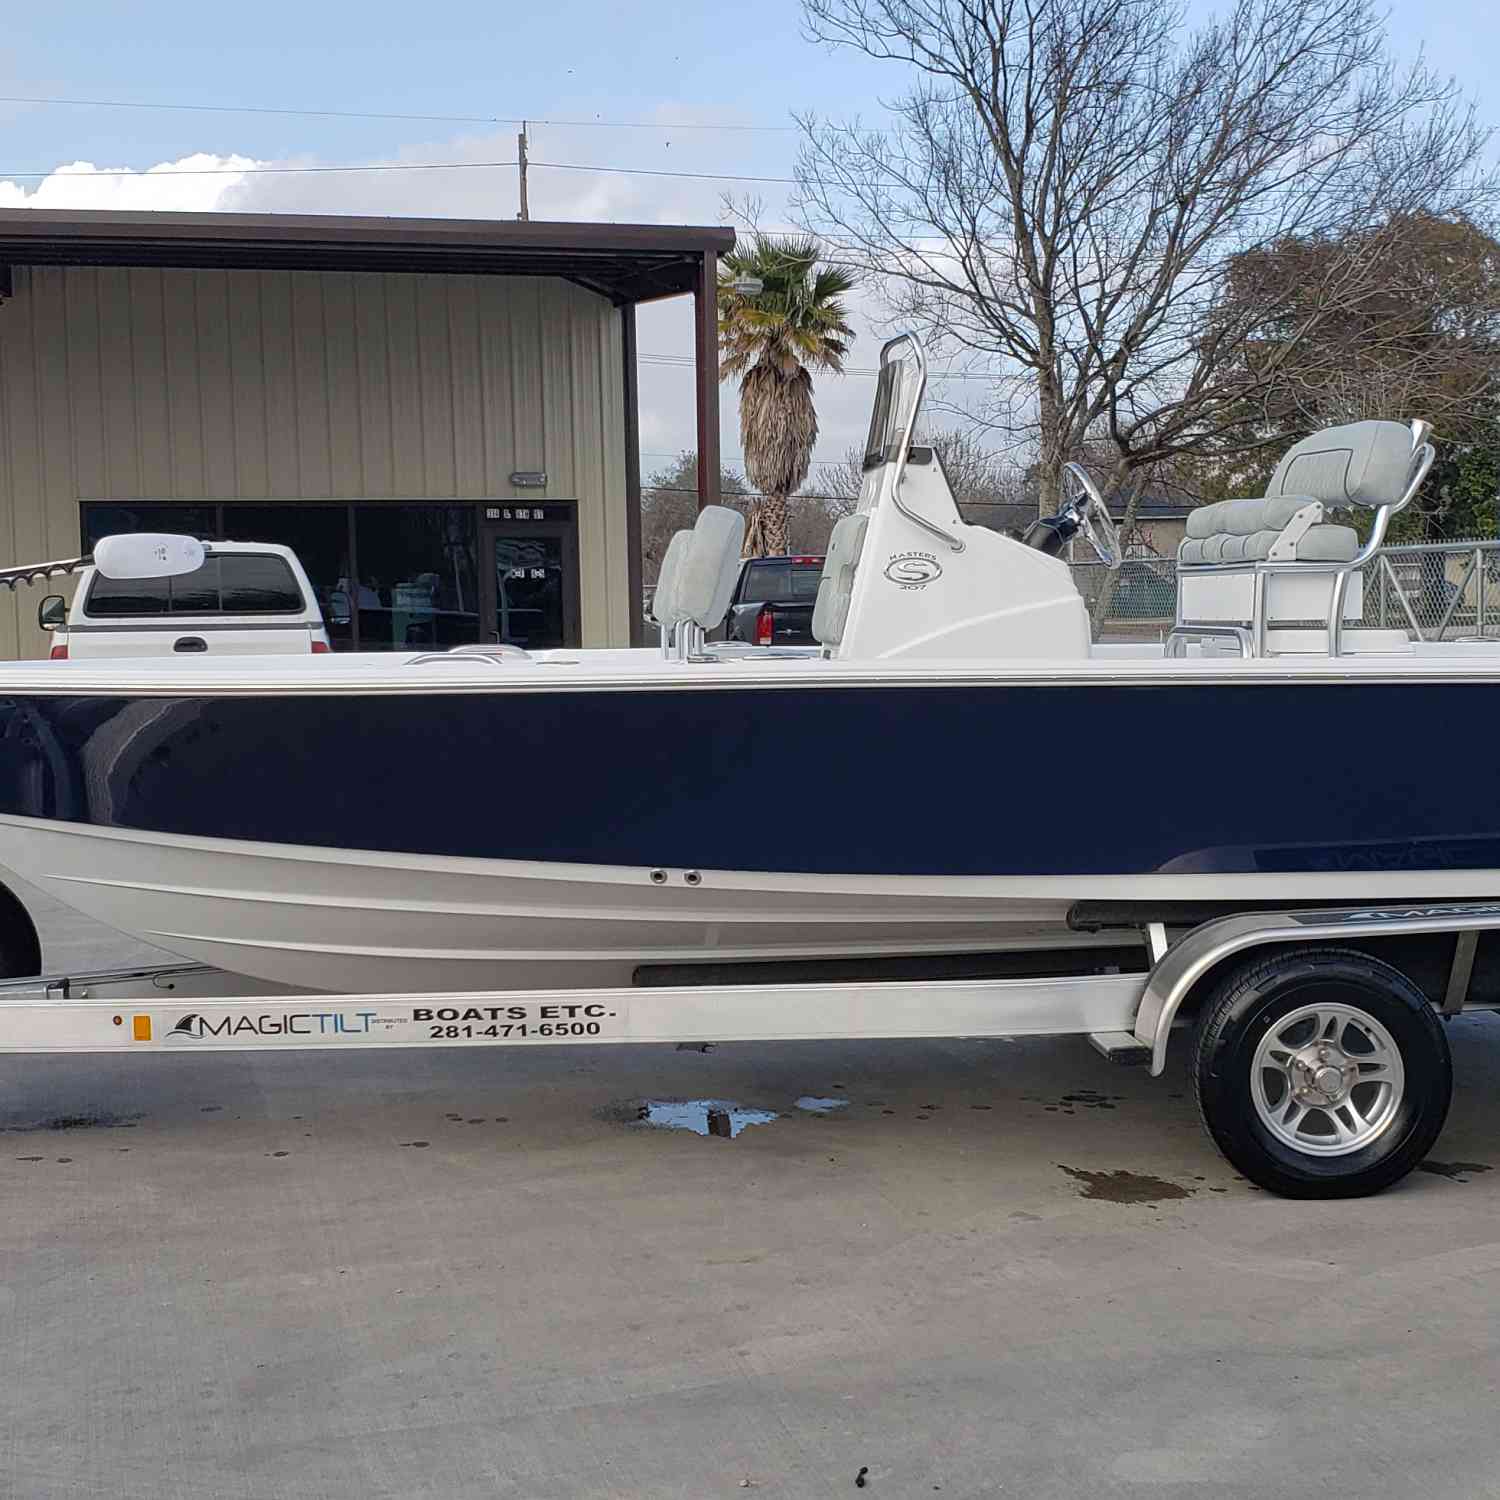 Just picked it up and headed home to Conroe, Texas. Love this boat!